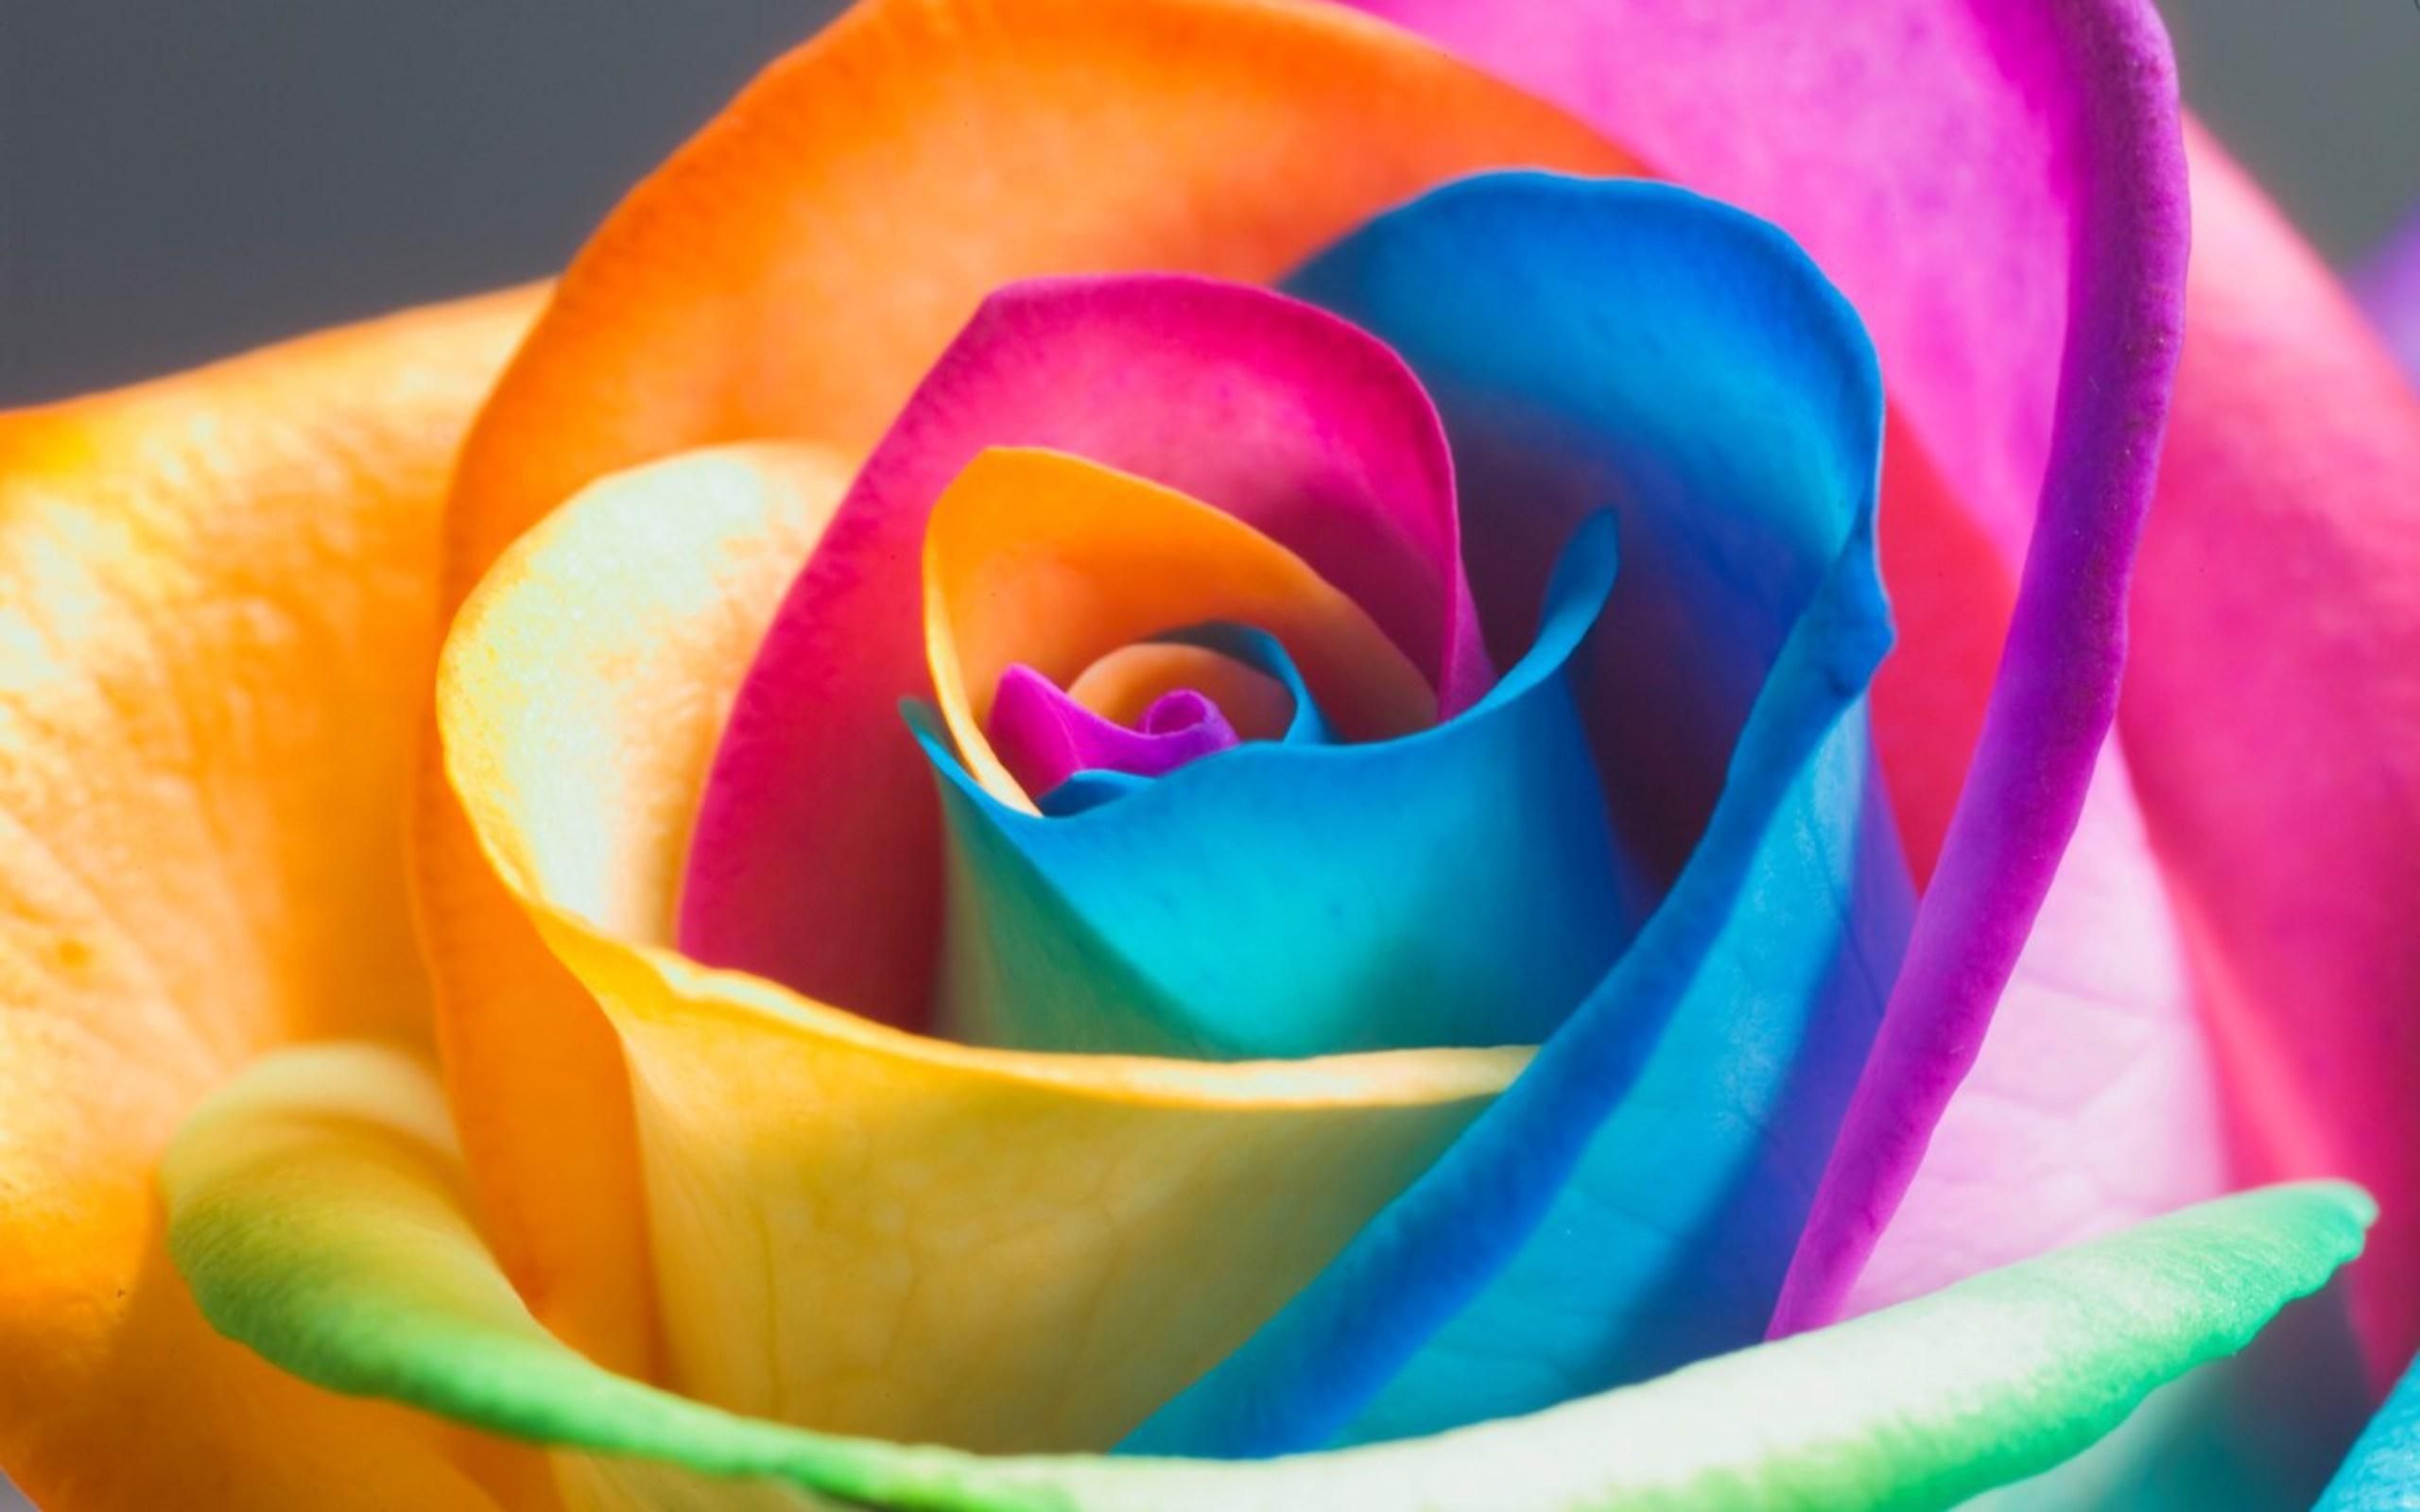 Wallpapers For Pretty Colorful Flower Backgrounds | HD Wallpapers ...